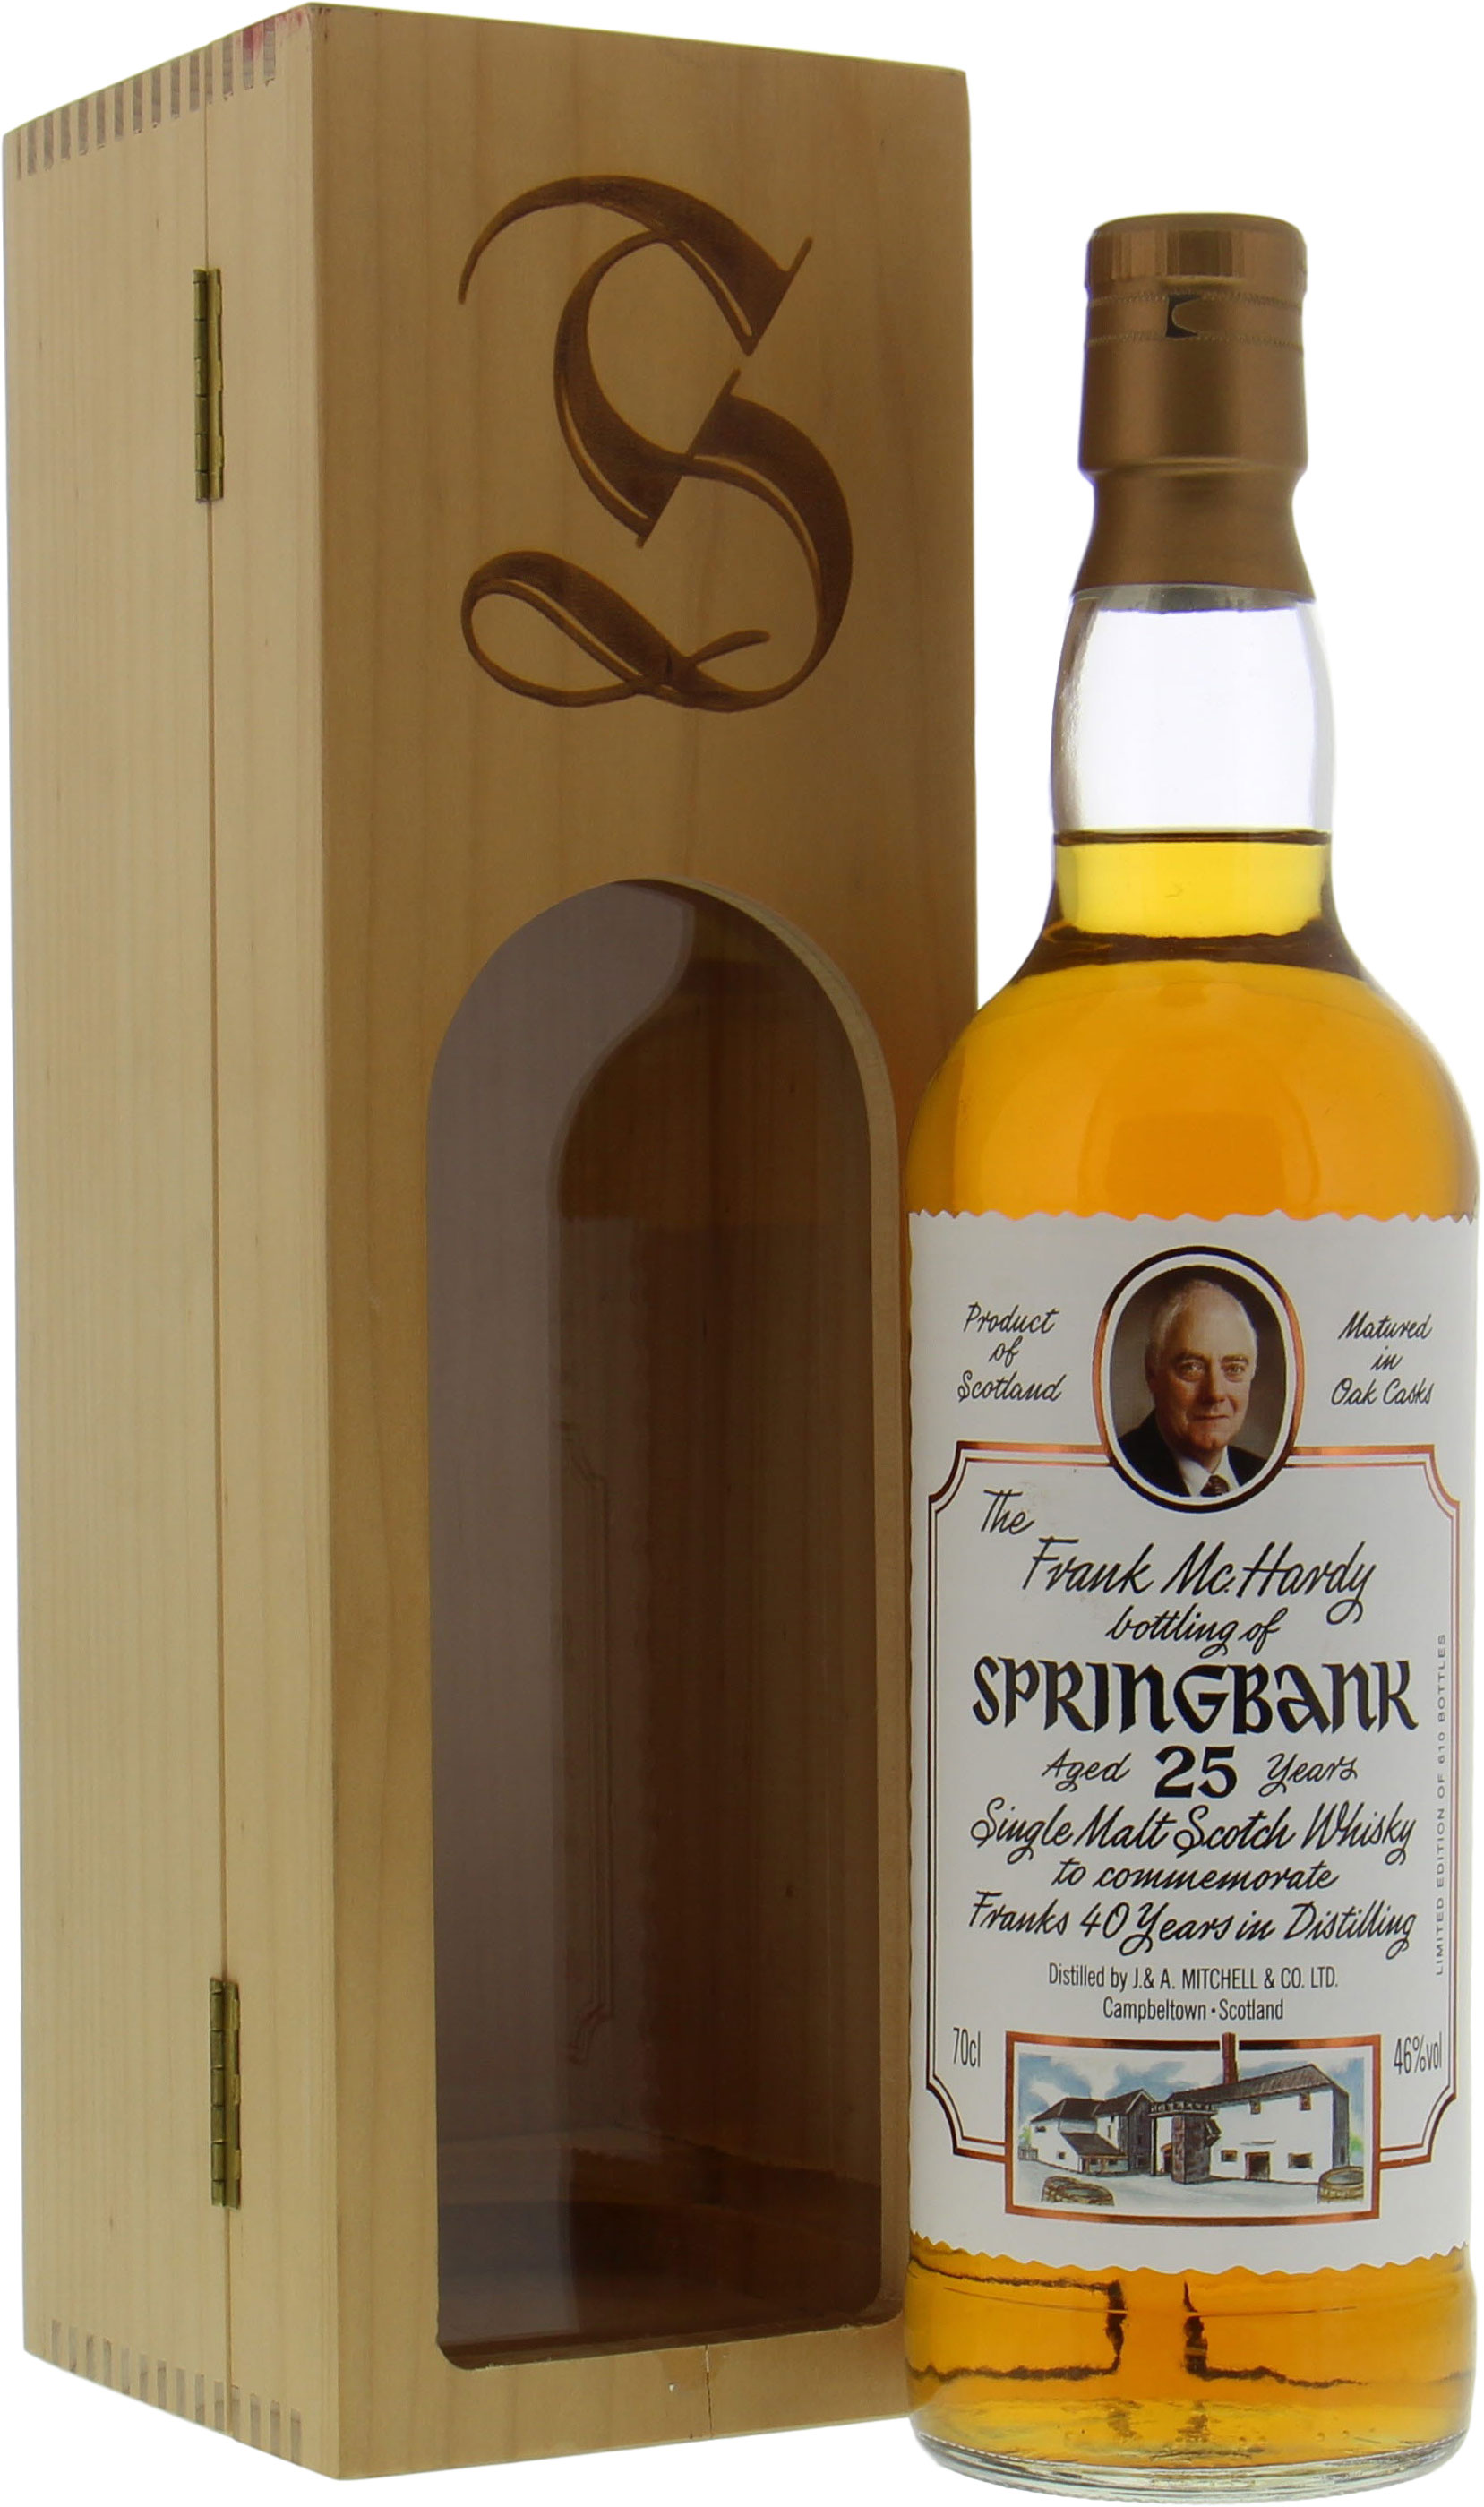 Springbank - 25 Years Old Frank McHardy 40 Years in Distilling 46% 1974 In Original Wooden Case